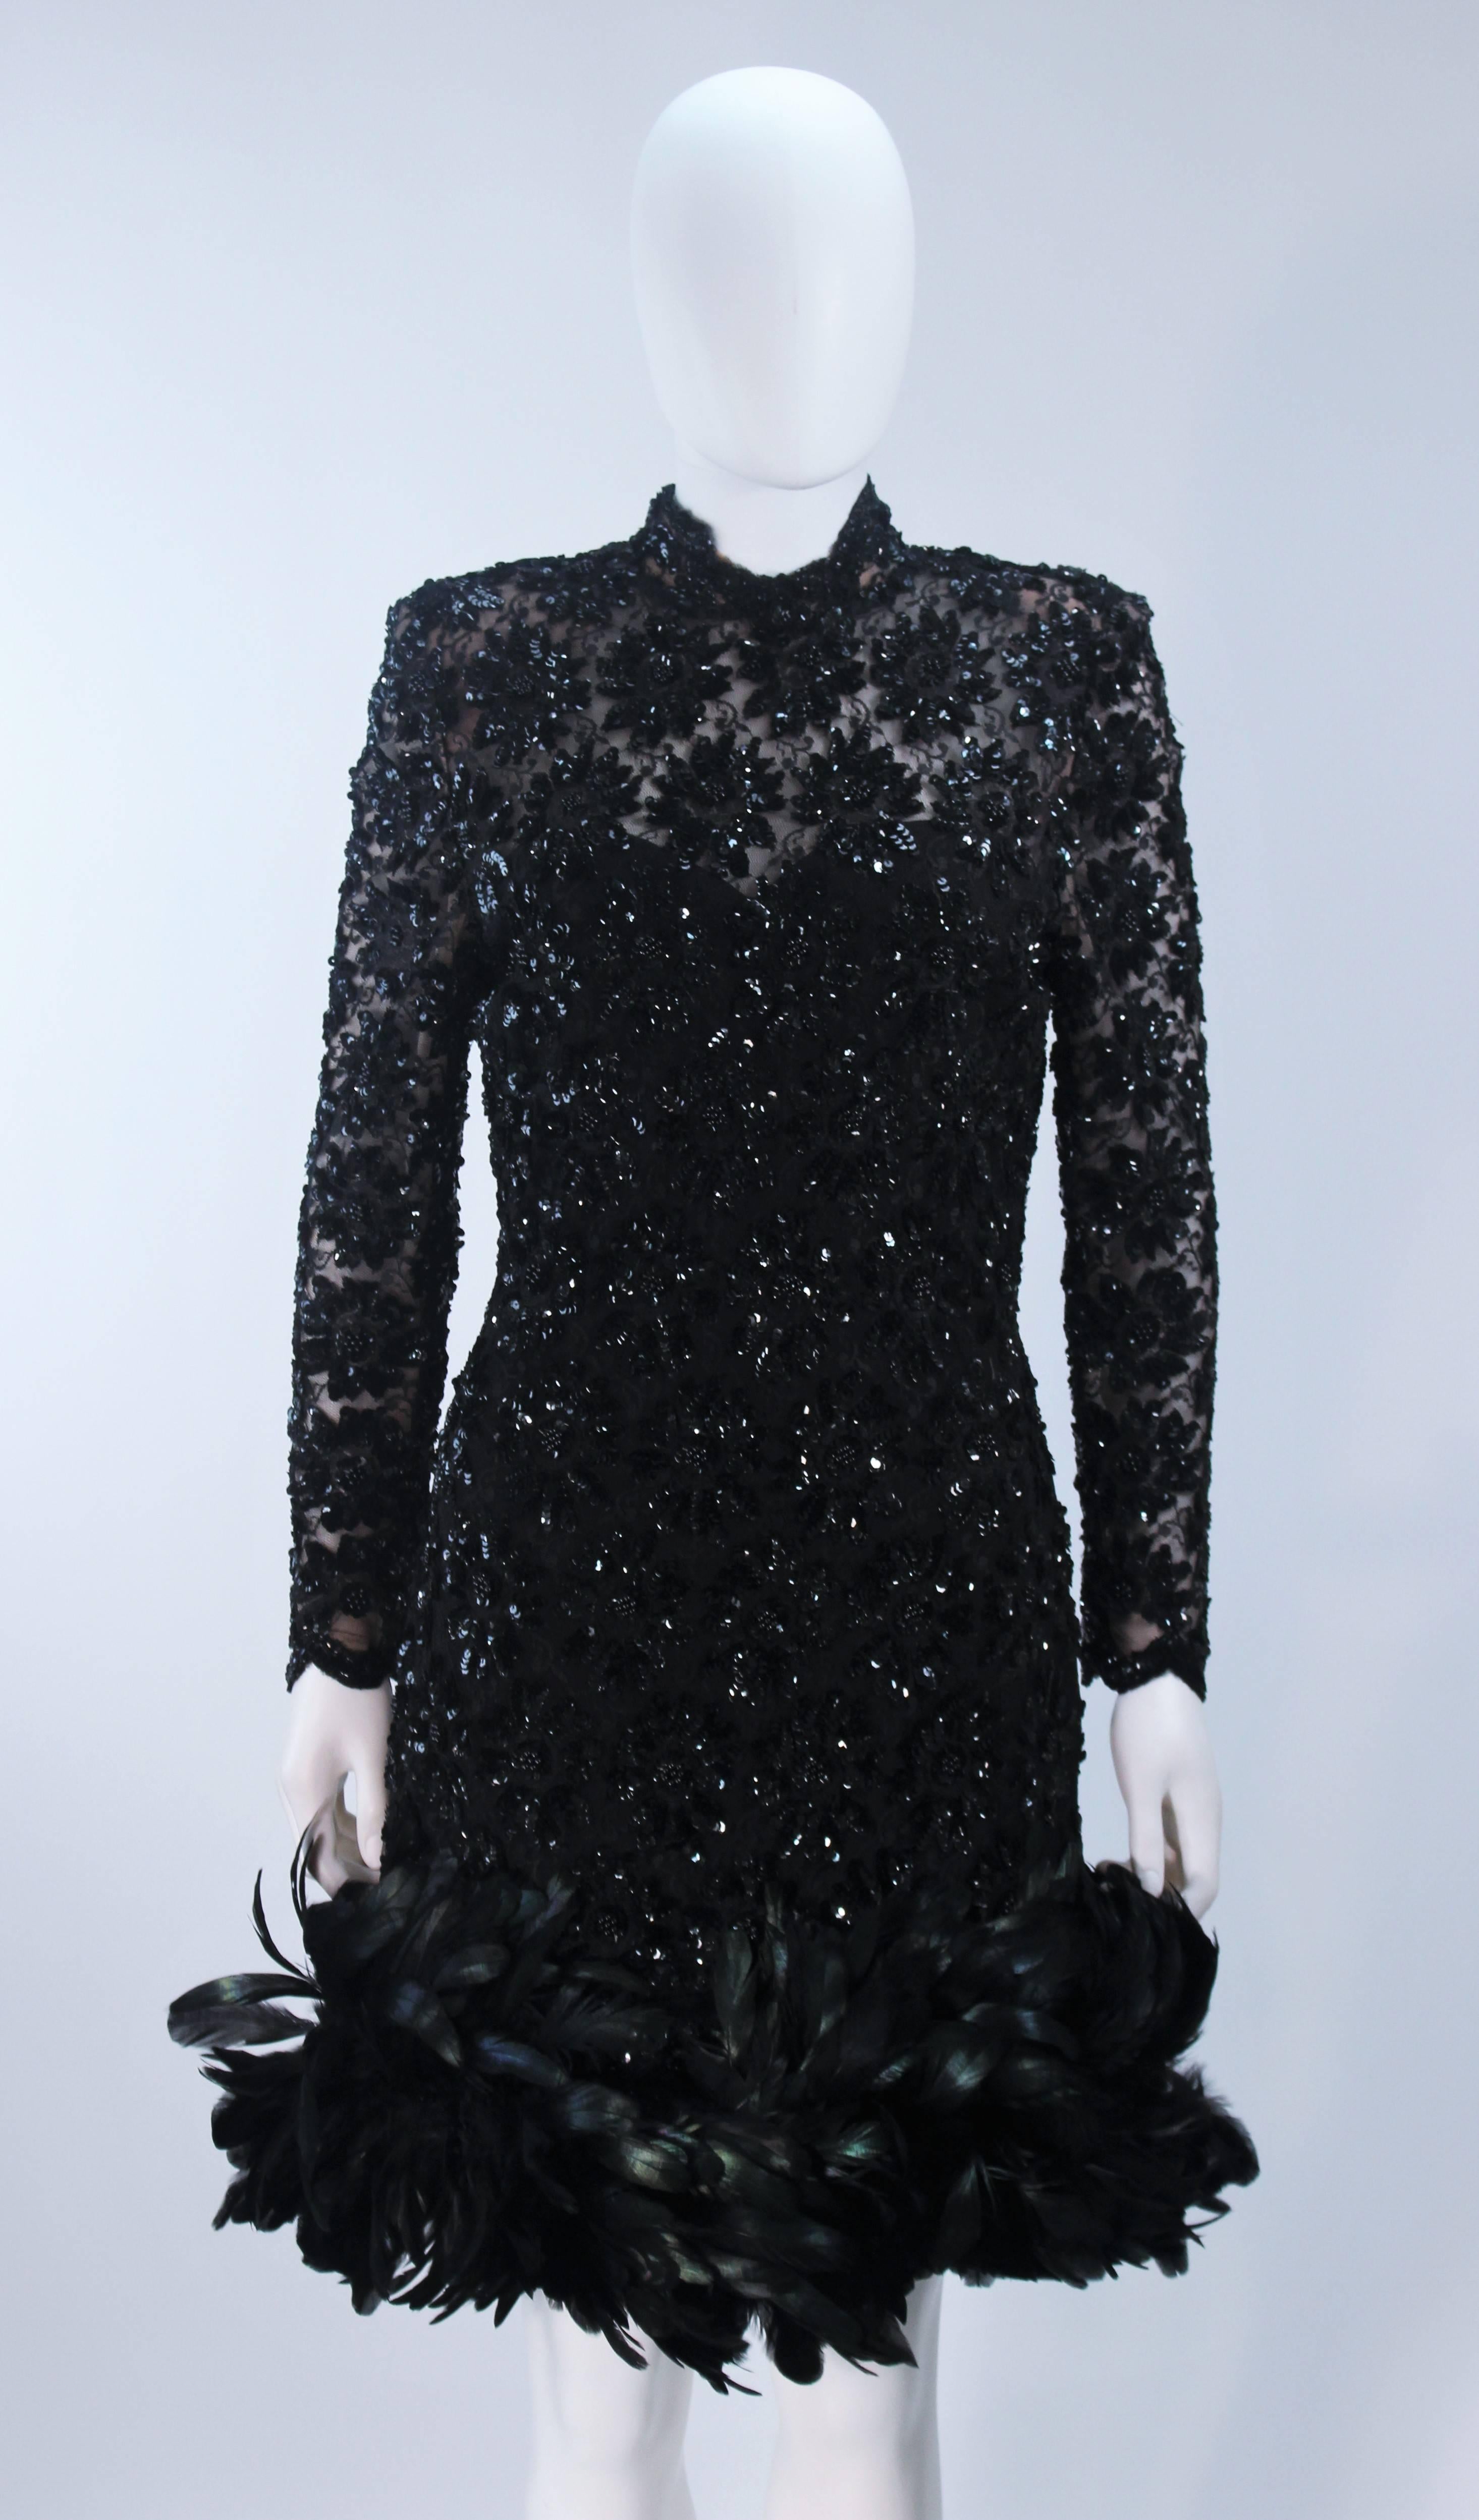  This Travilla  dress is composed of a fine black beaded and sequin embellished lace, with an black iridescent feather trim. There is a center back zipper closure. In excellent vintage condition. 

  **Please cross-reference measurements for